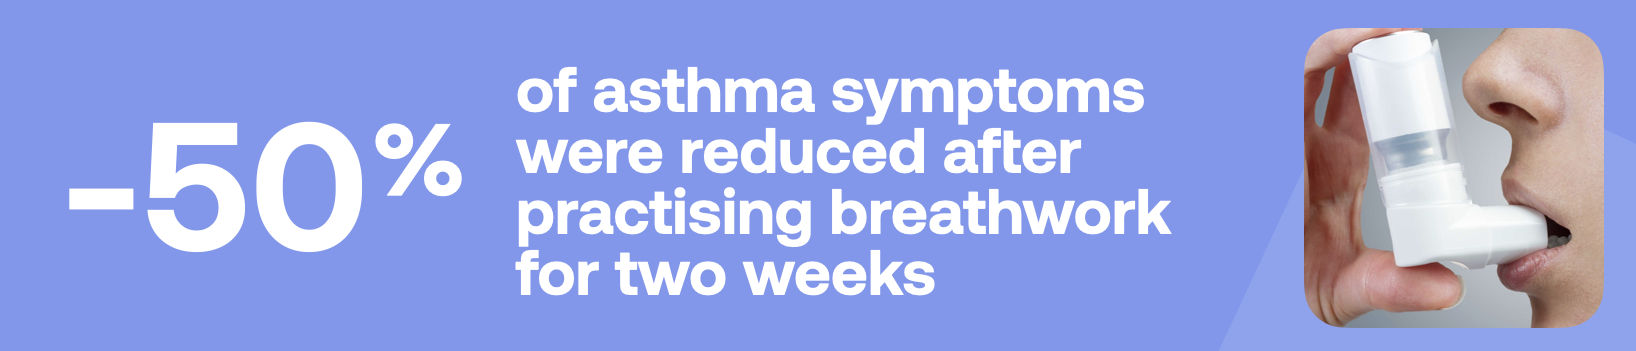 -50% of asthma symptoms were reduced after practising breathwork for two weeks